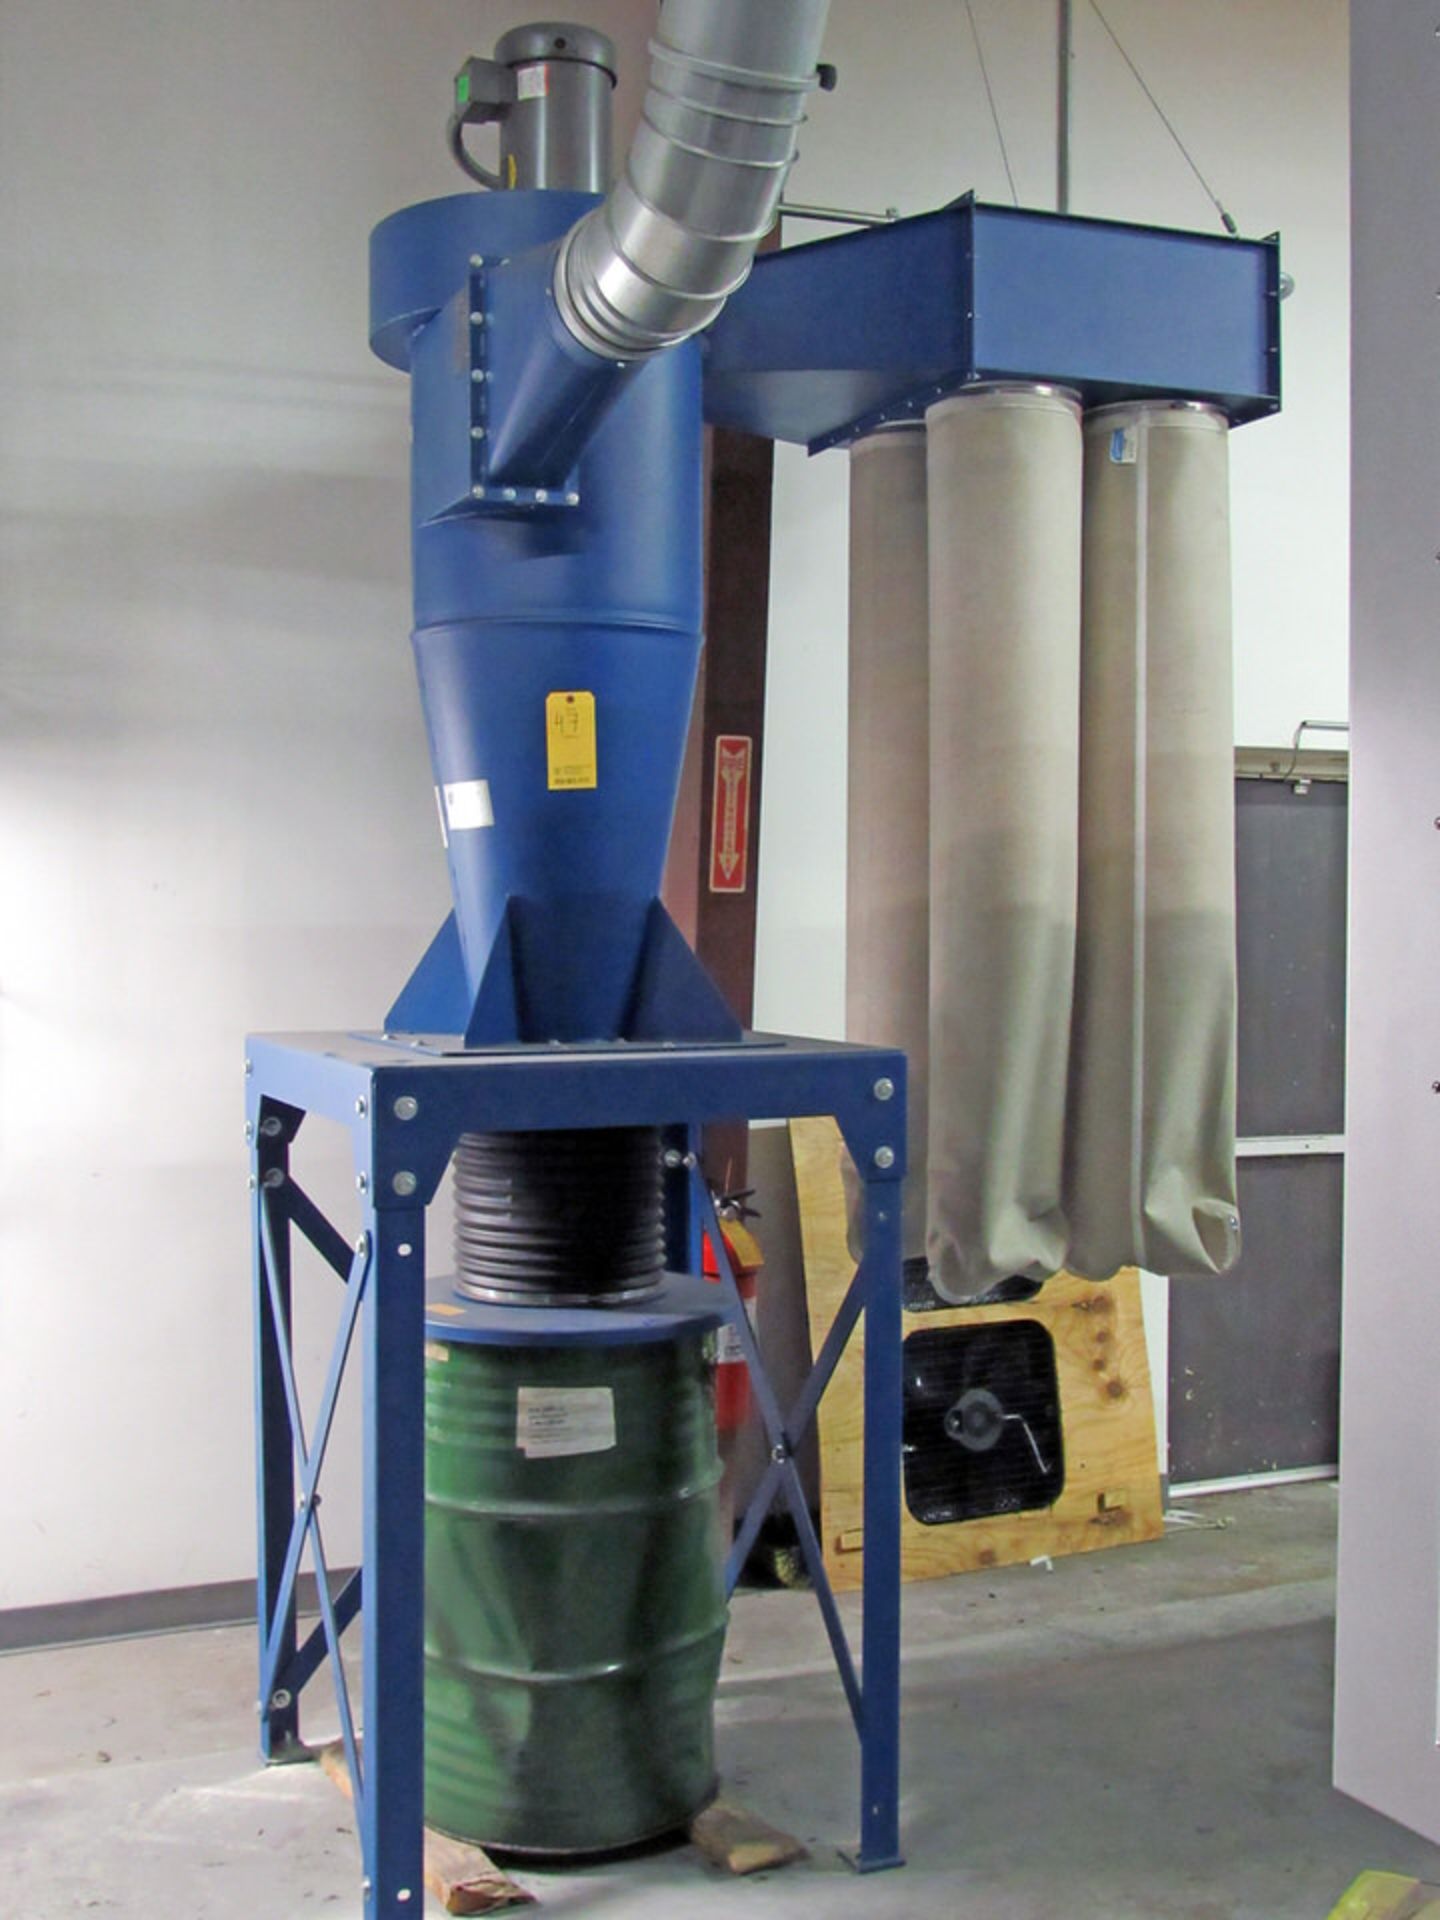 Donaldson Torit Model 20 CYC Cyclone Collector Dust Collection System, 5 hp, 2000 cfm cap., 20" - Image 2 of 5